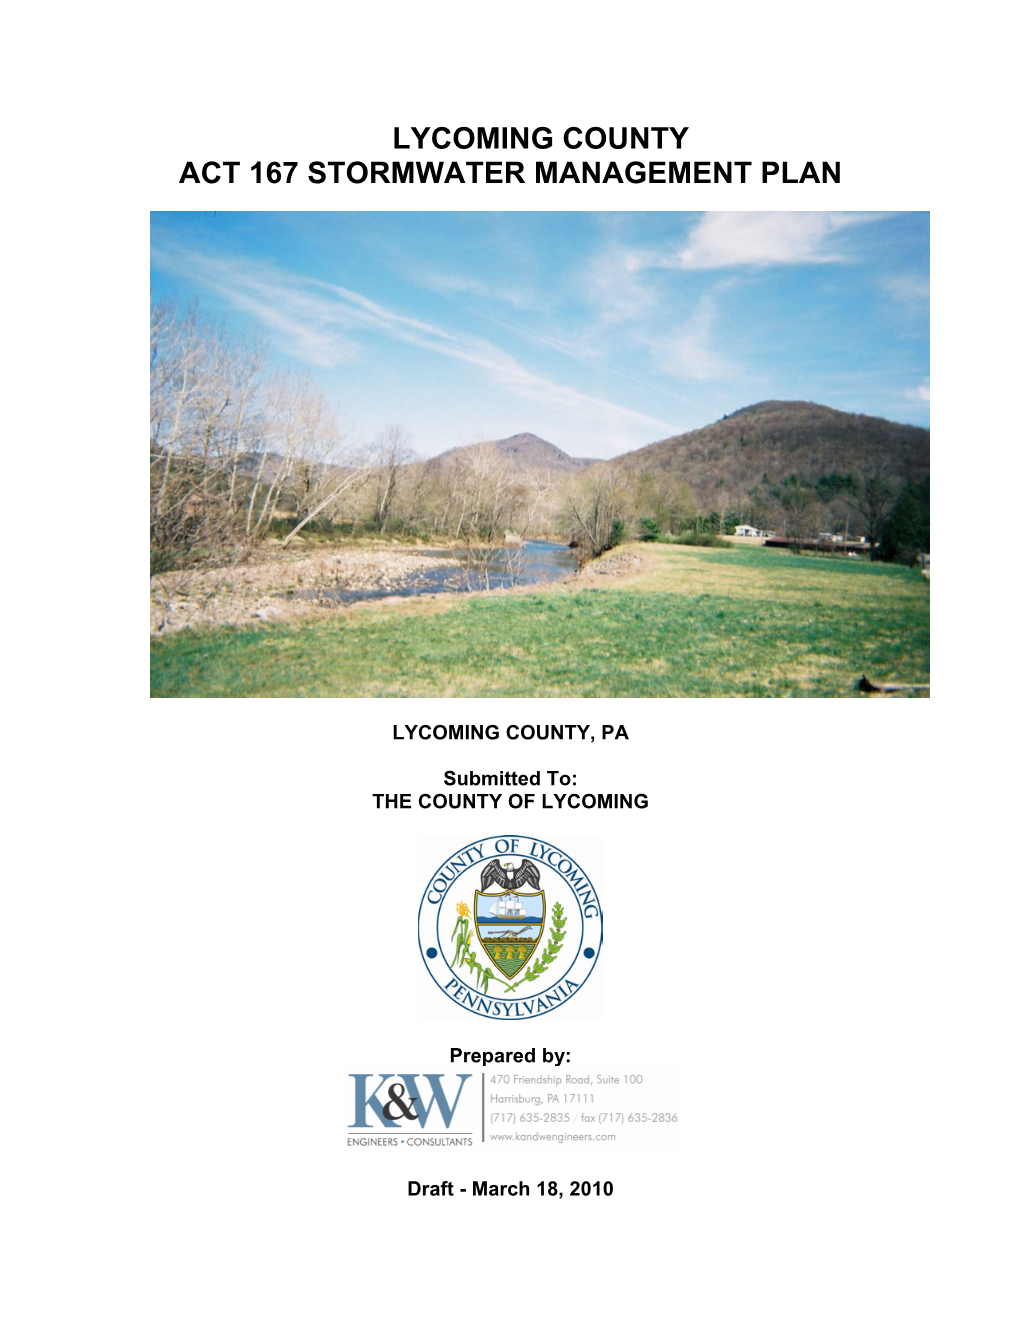 Act 167 Stormwater Management Plan